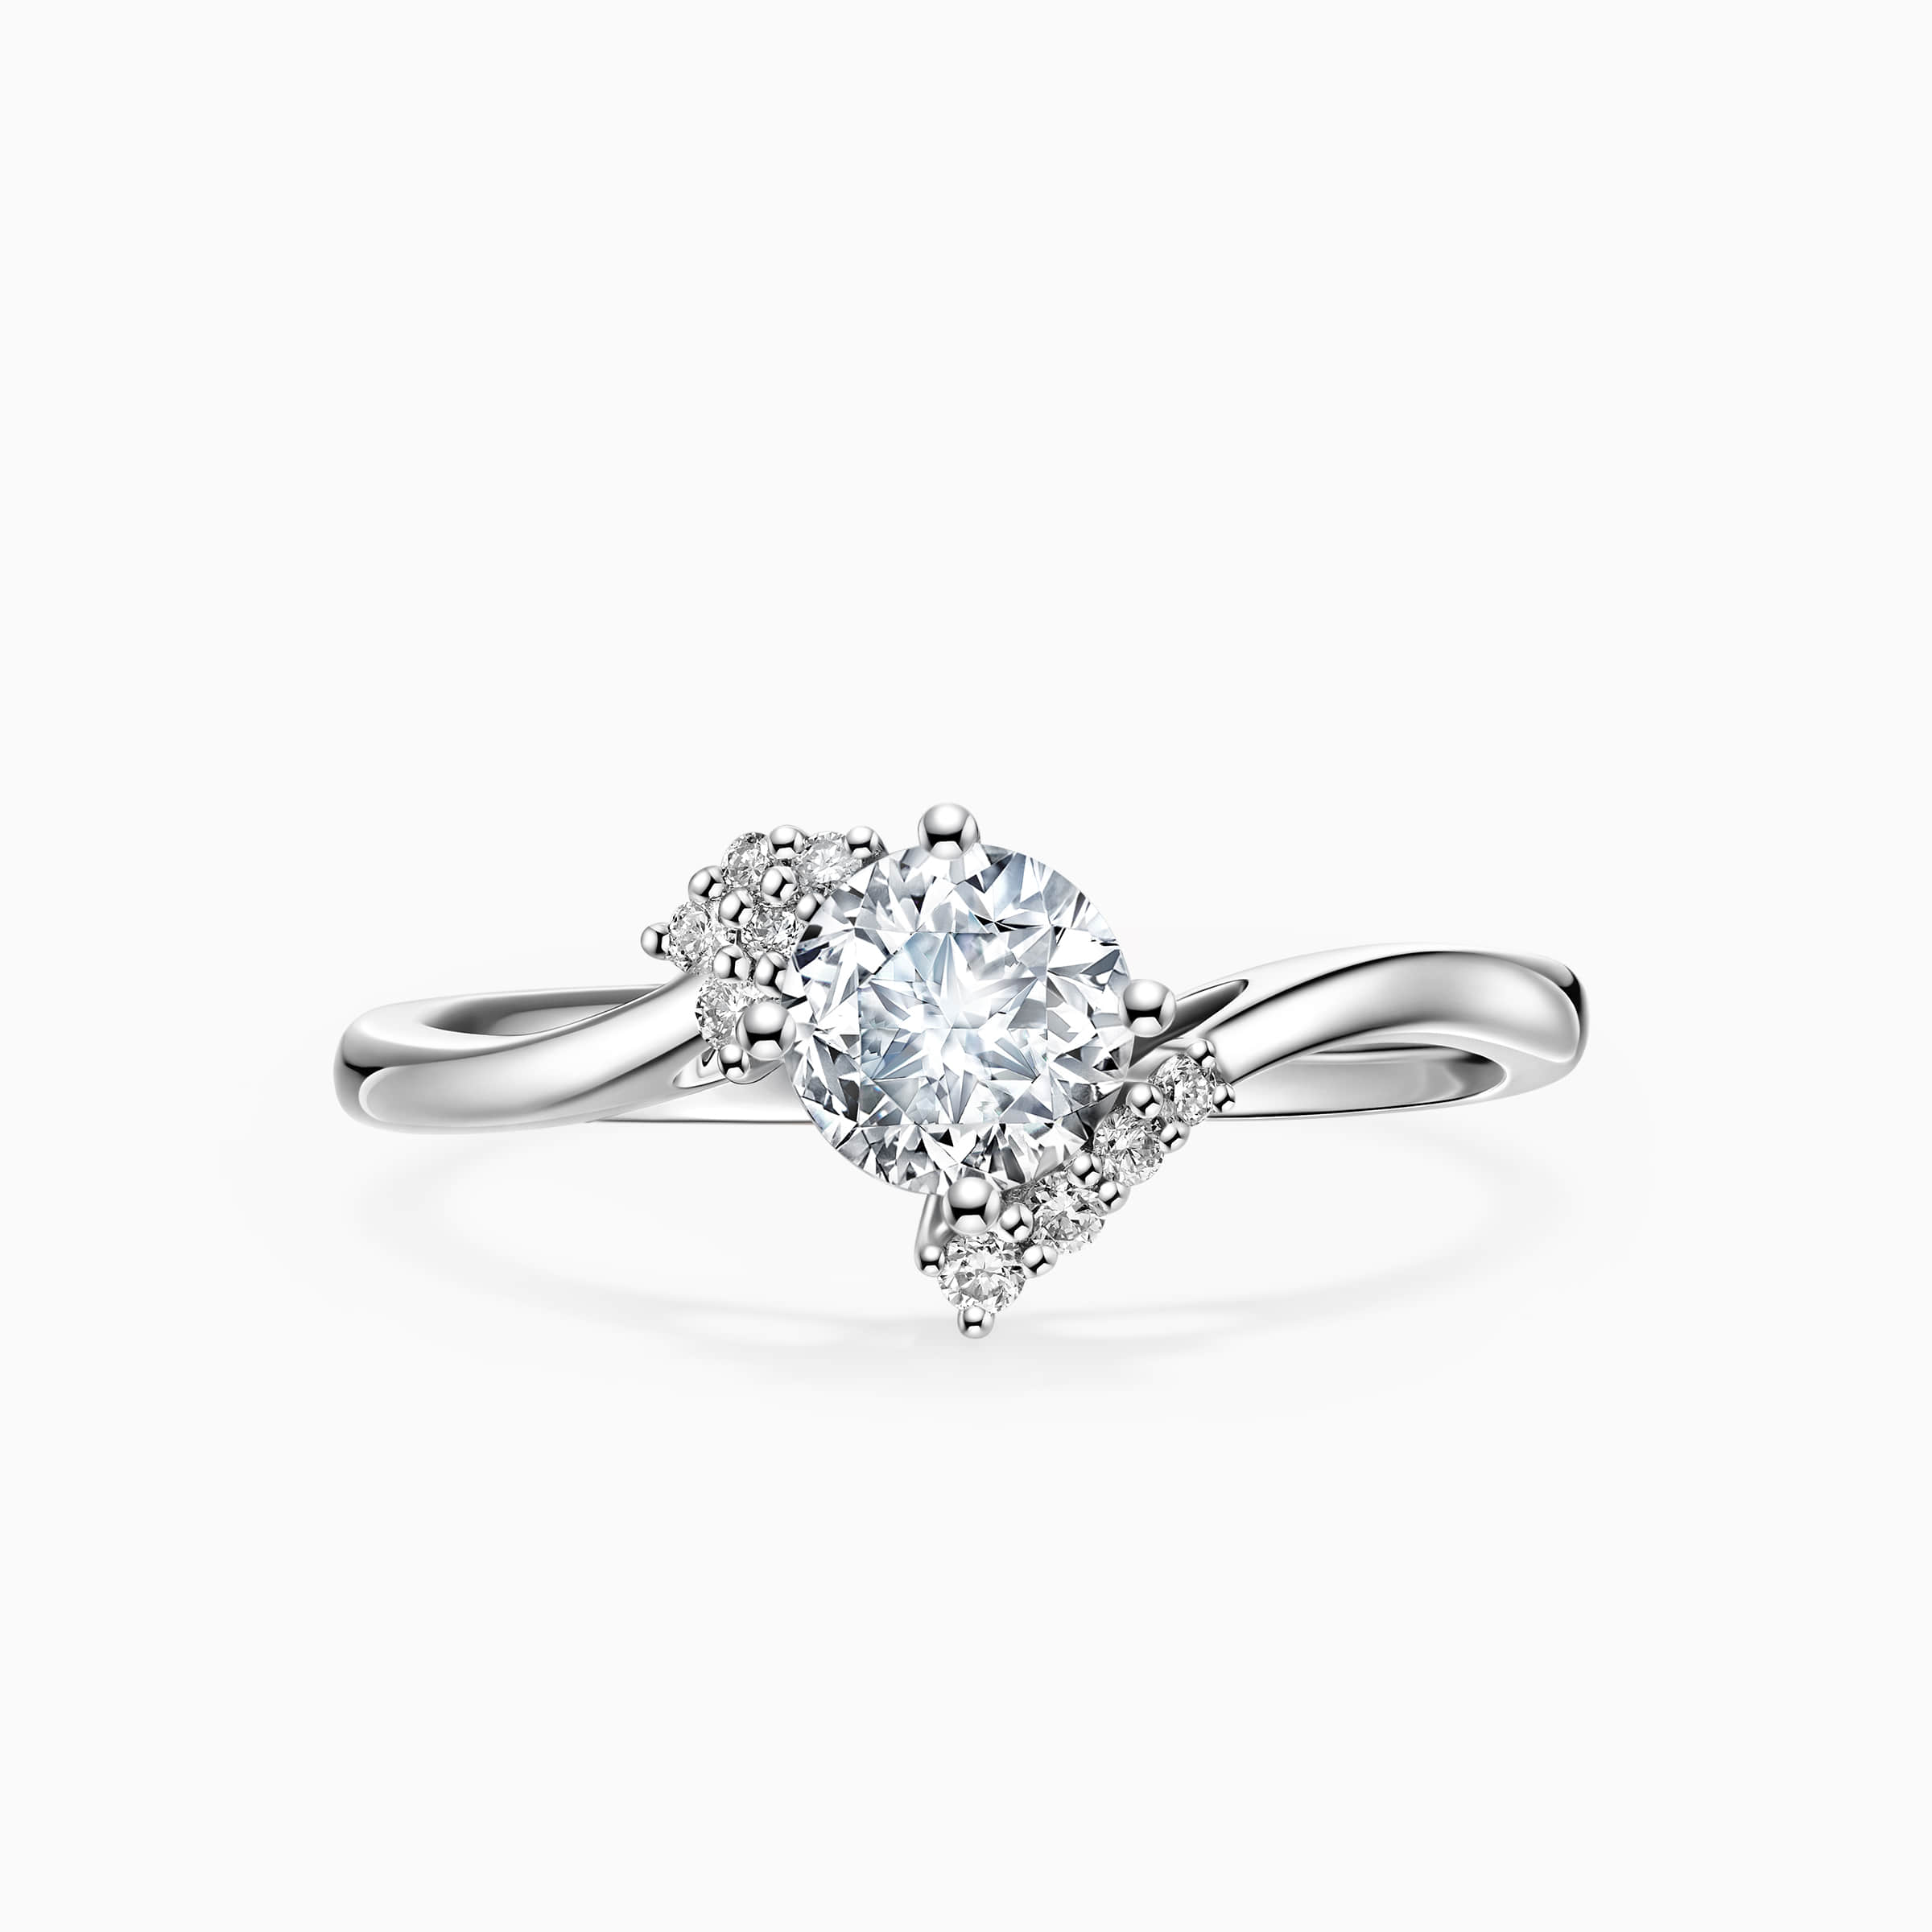 Darry Ring diamond bypass engagement ring front view